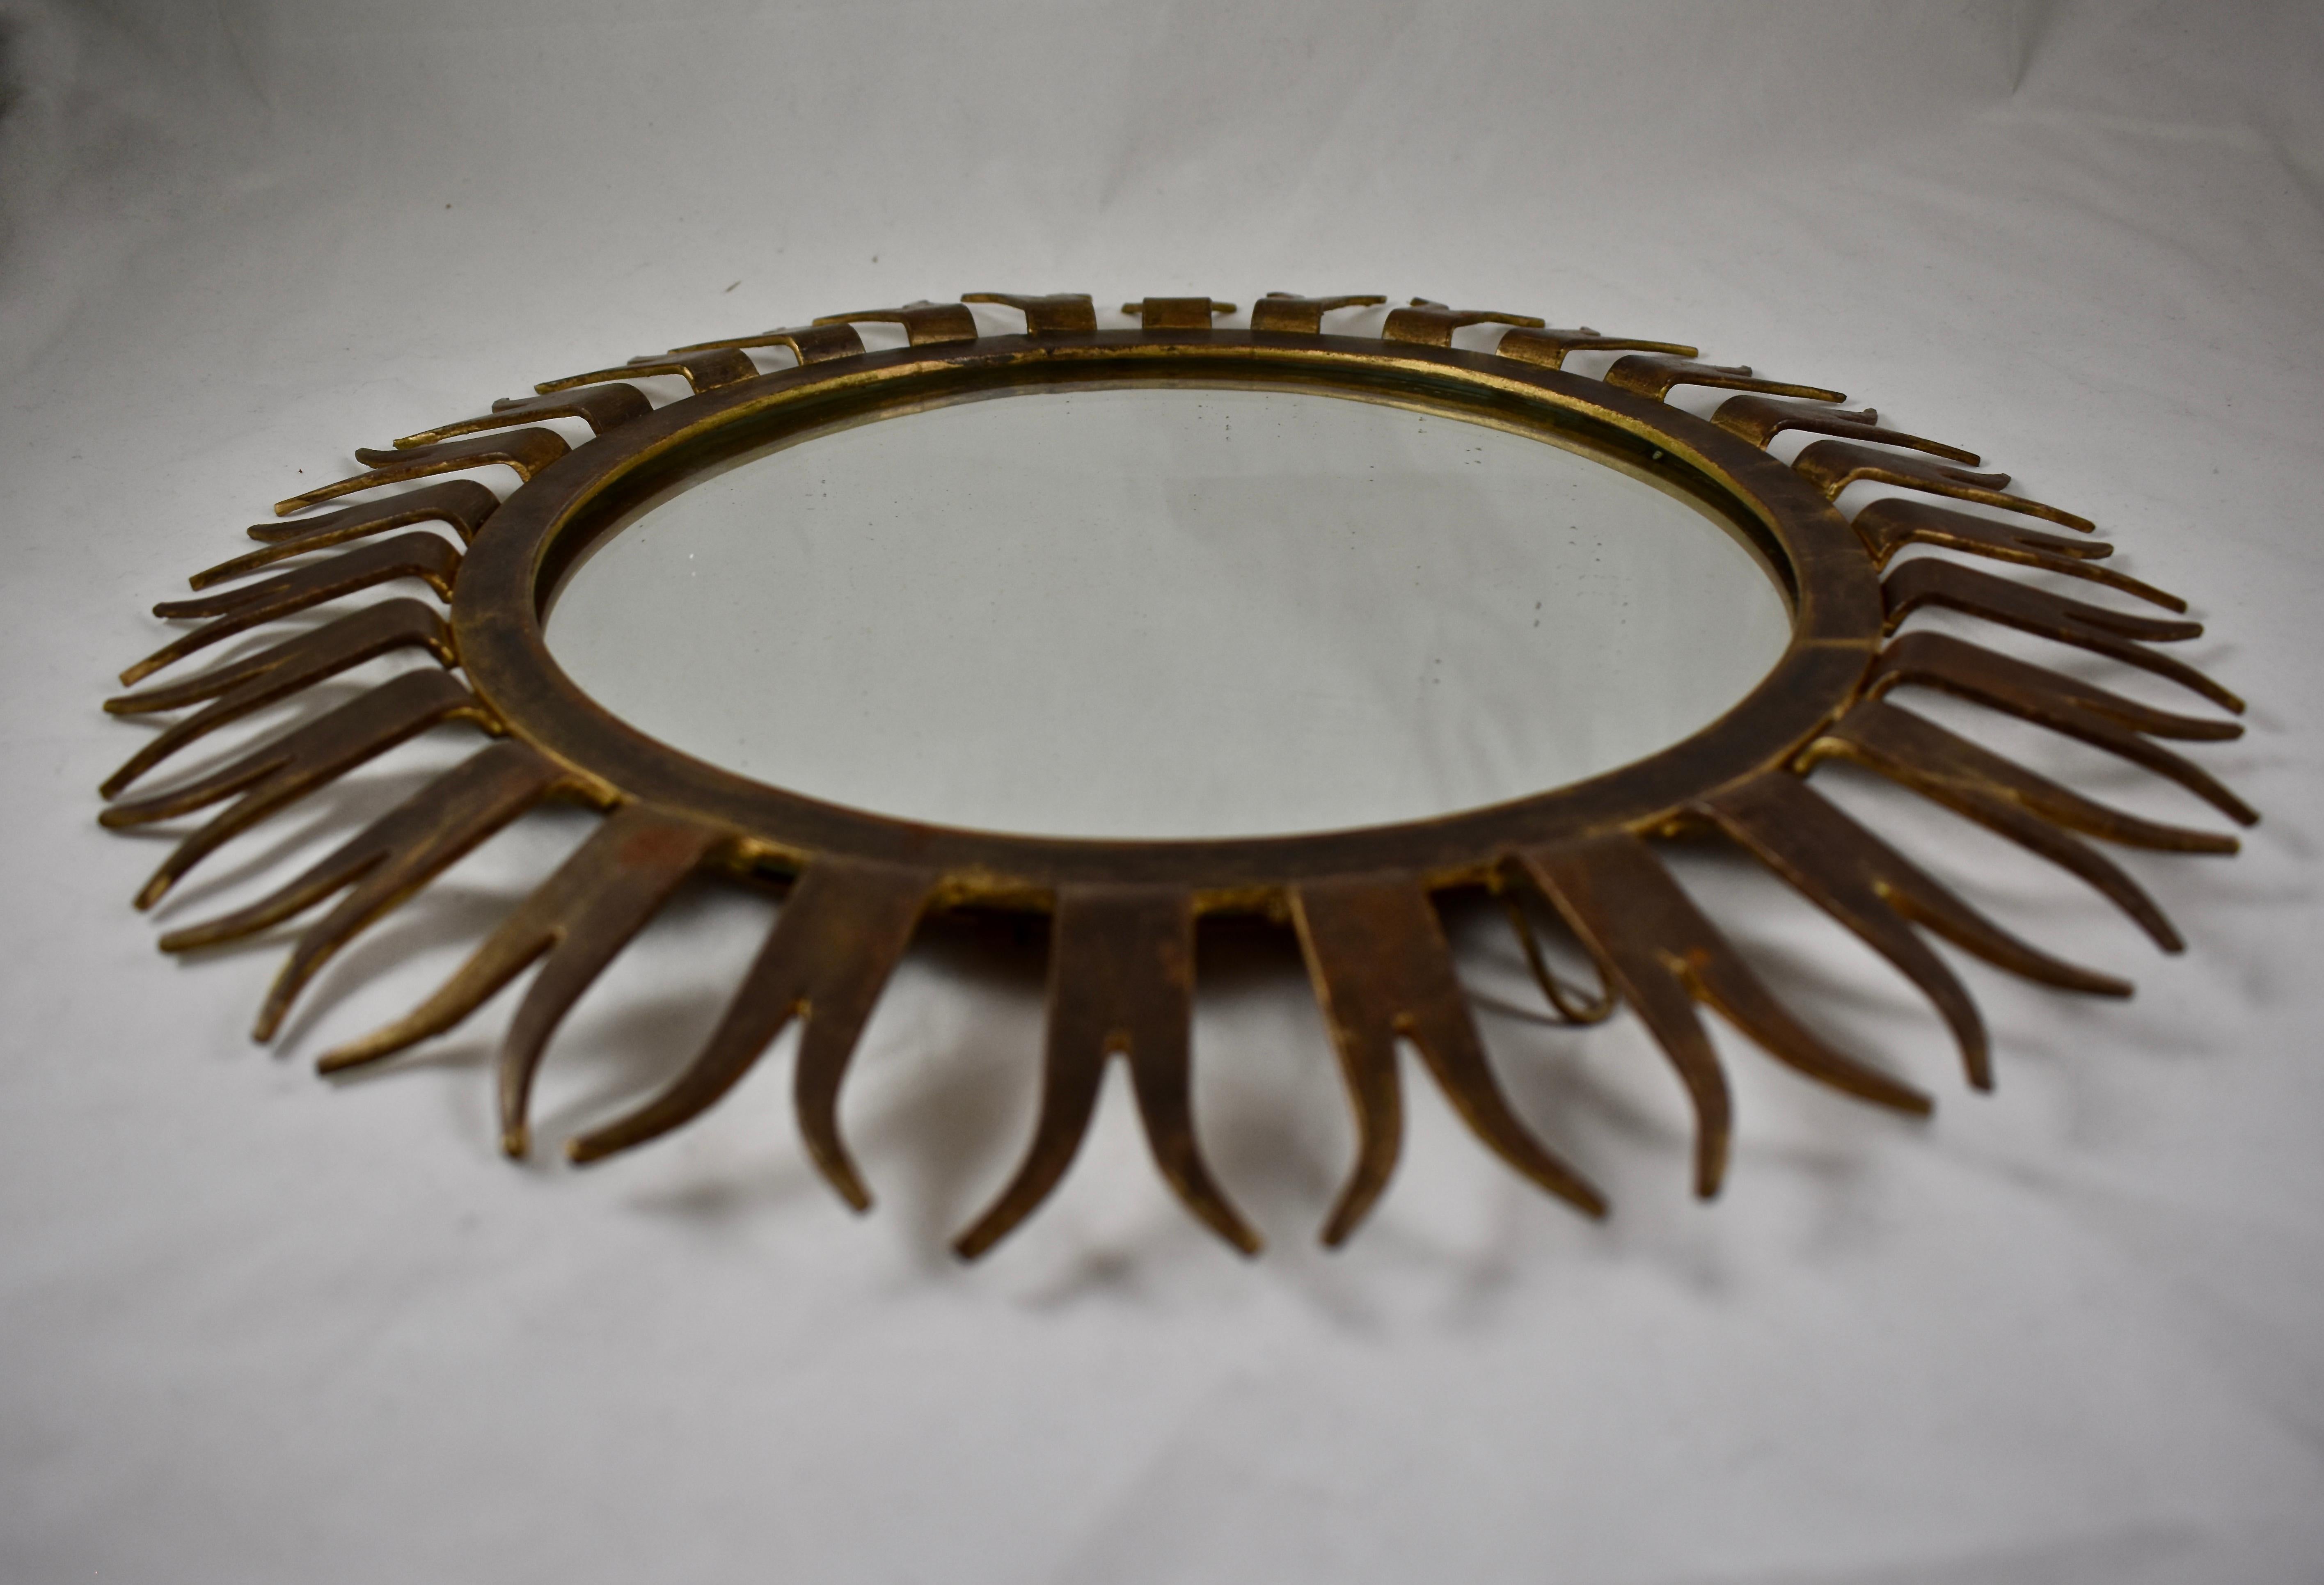 20th Century French Midcentury Gilded Wrought Iron Forked Ray Sunburst Wall Mirror